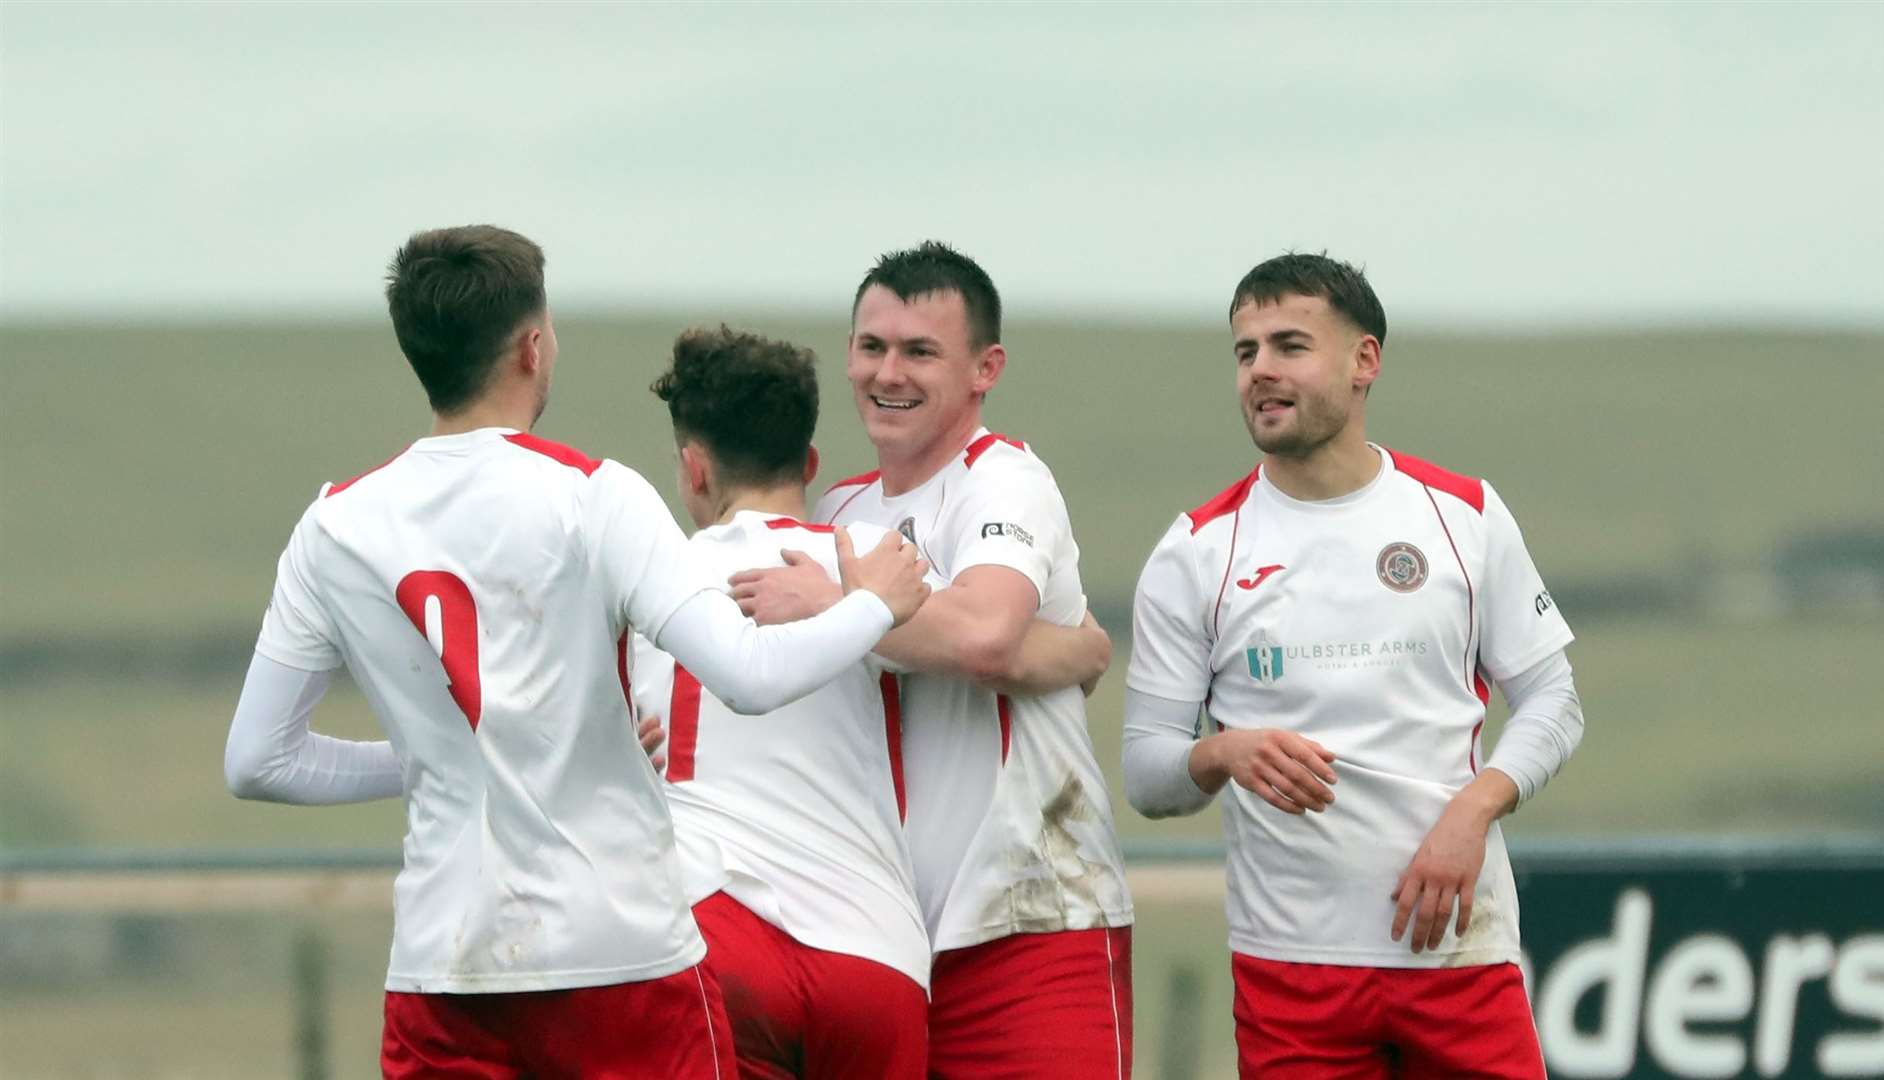 Andy Mackay (centre) is congratulated after slotting in his second goal by James Mackintosh, Mark Munro and Jonah Martens. Picture: James Gunn